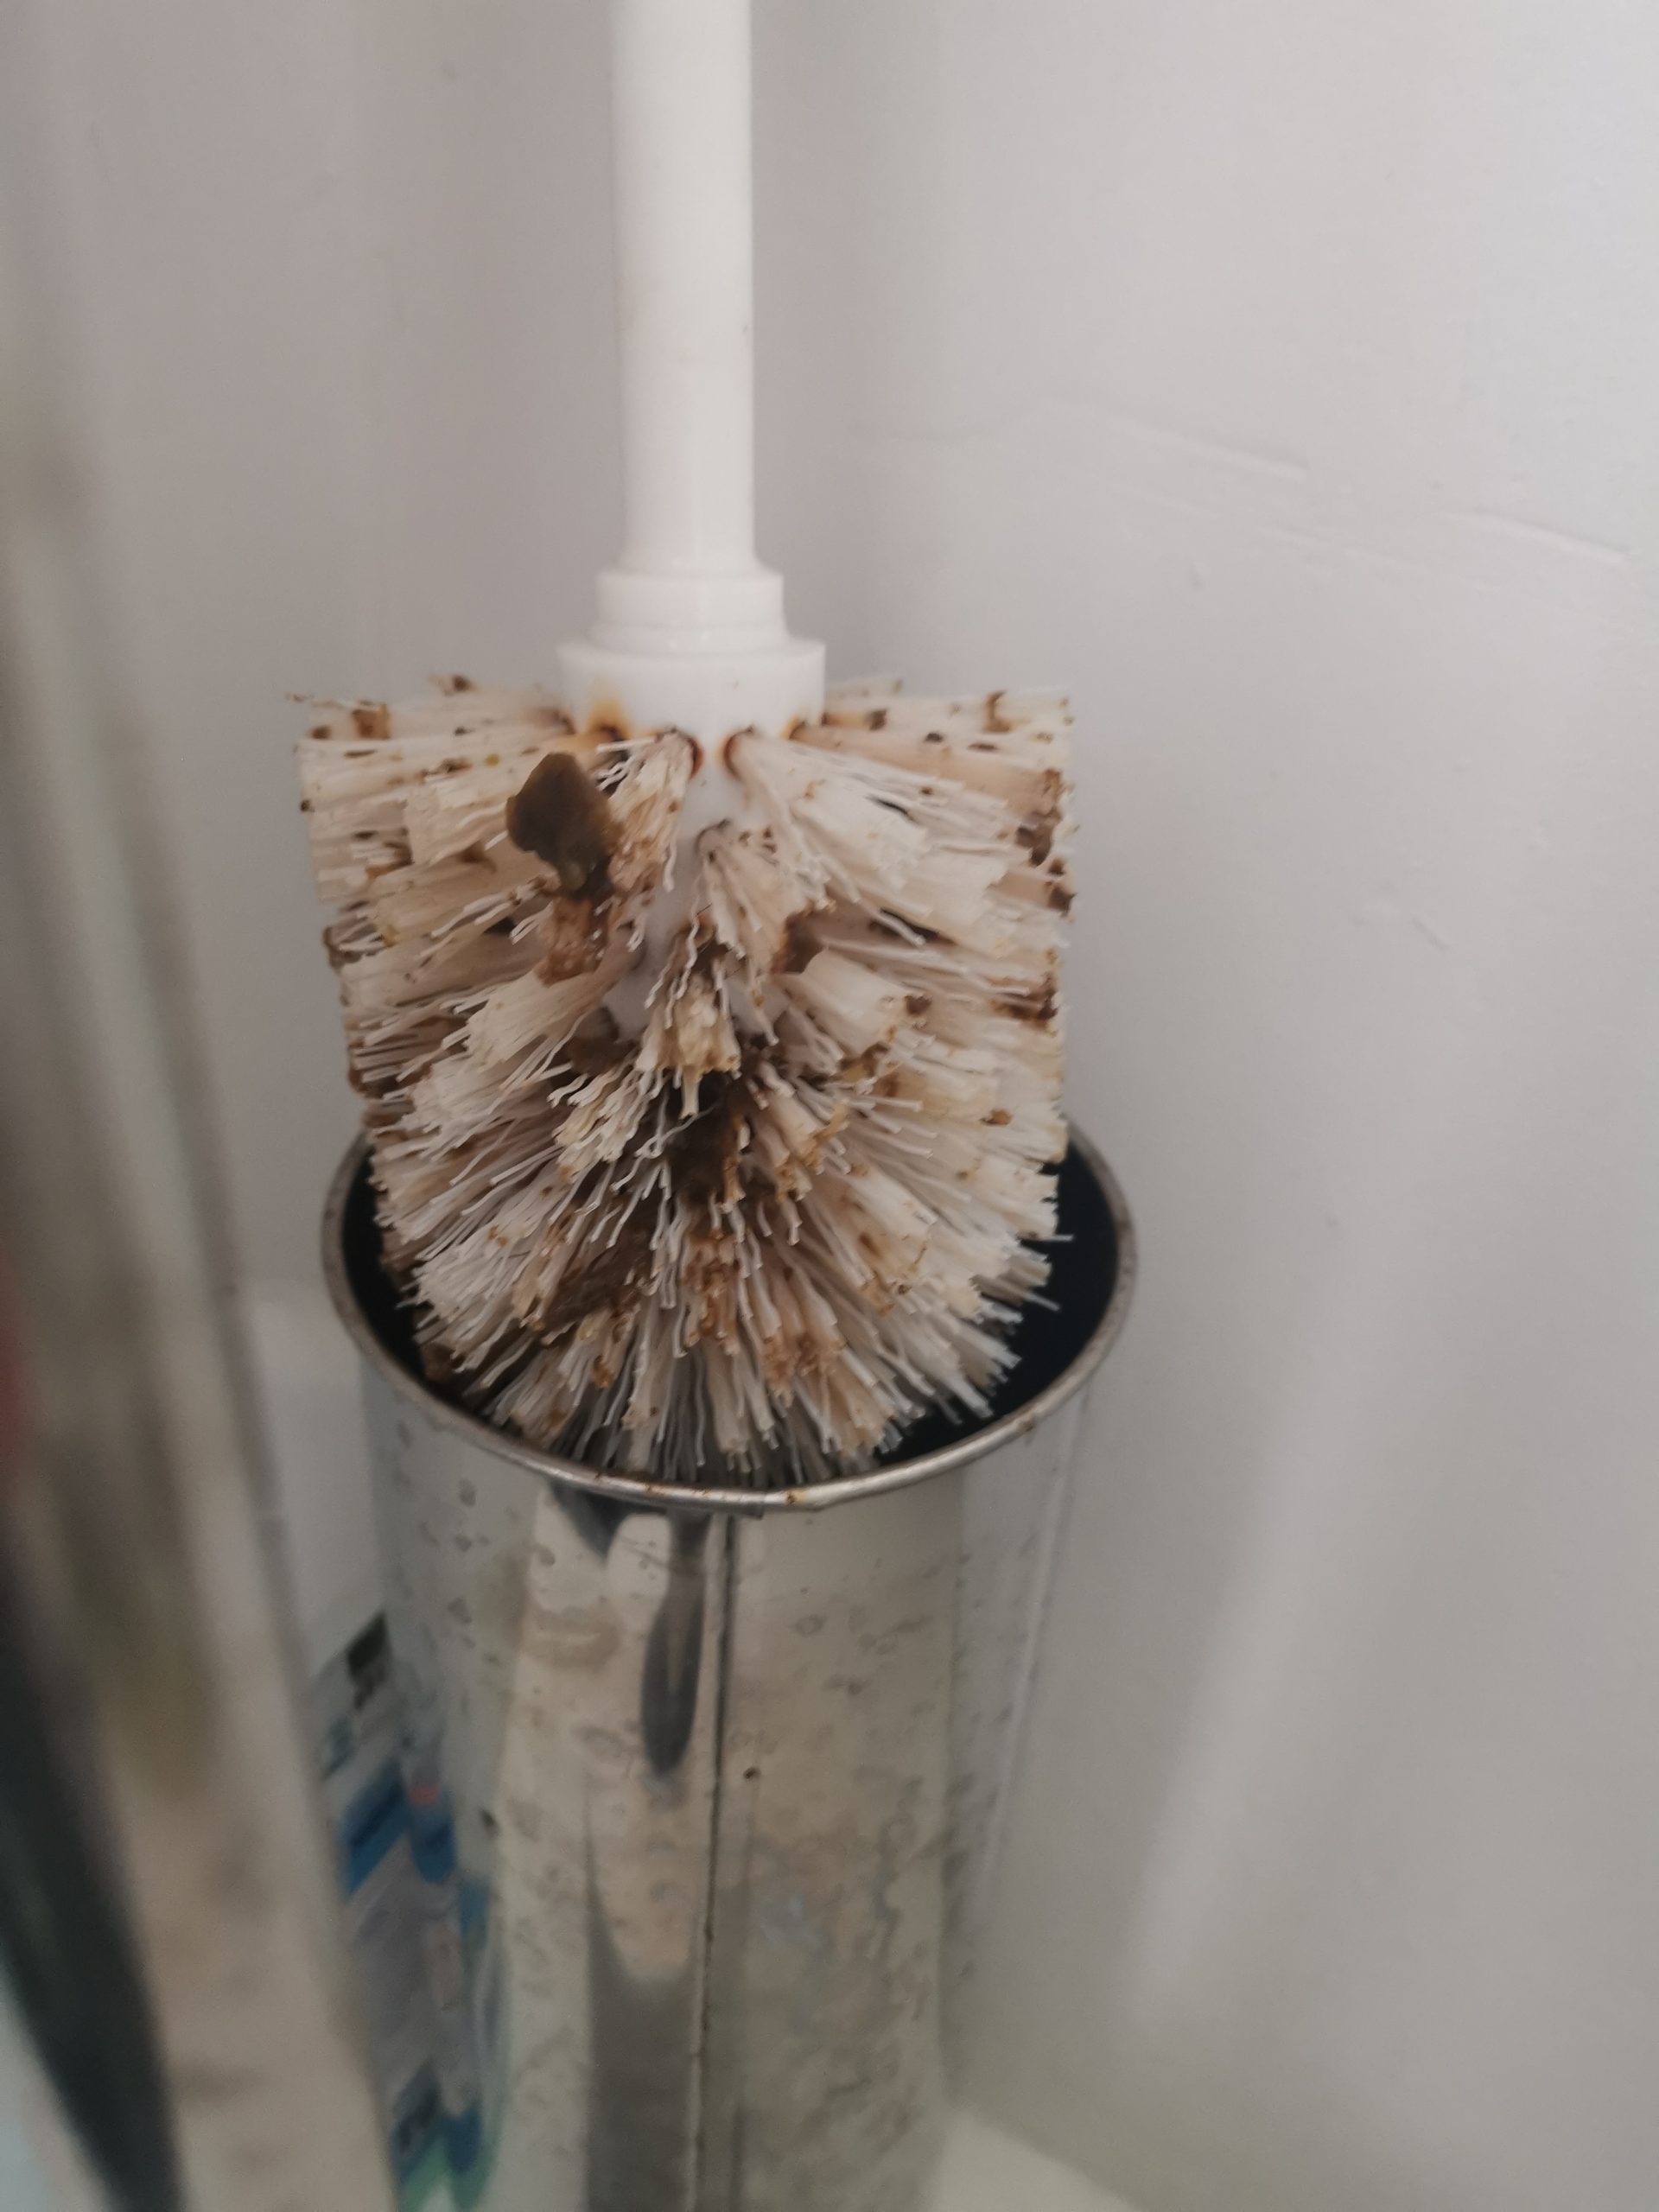 Poo-covered toilet brush found in holiday apartment - Tourism News Uk